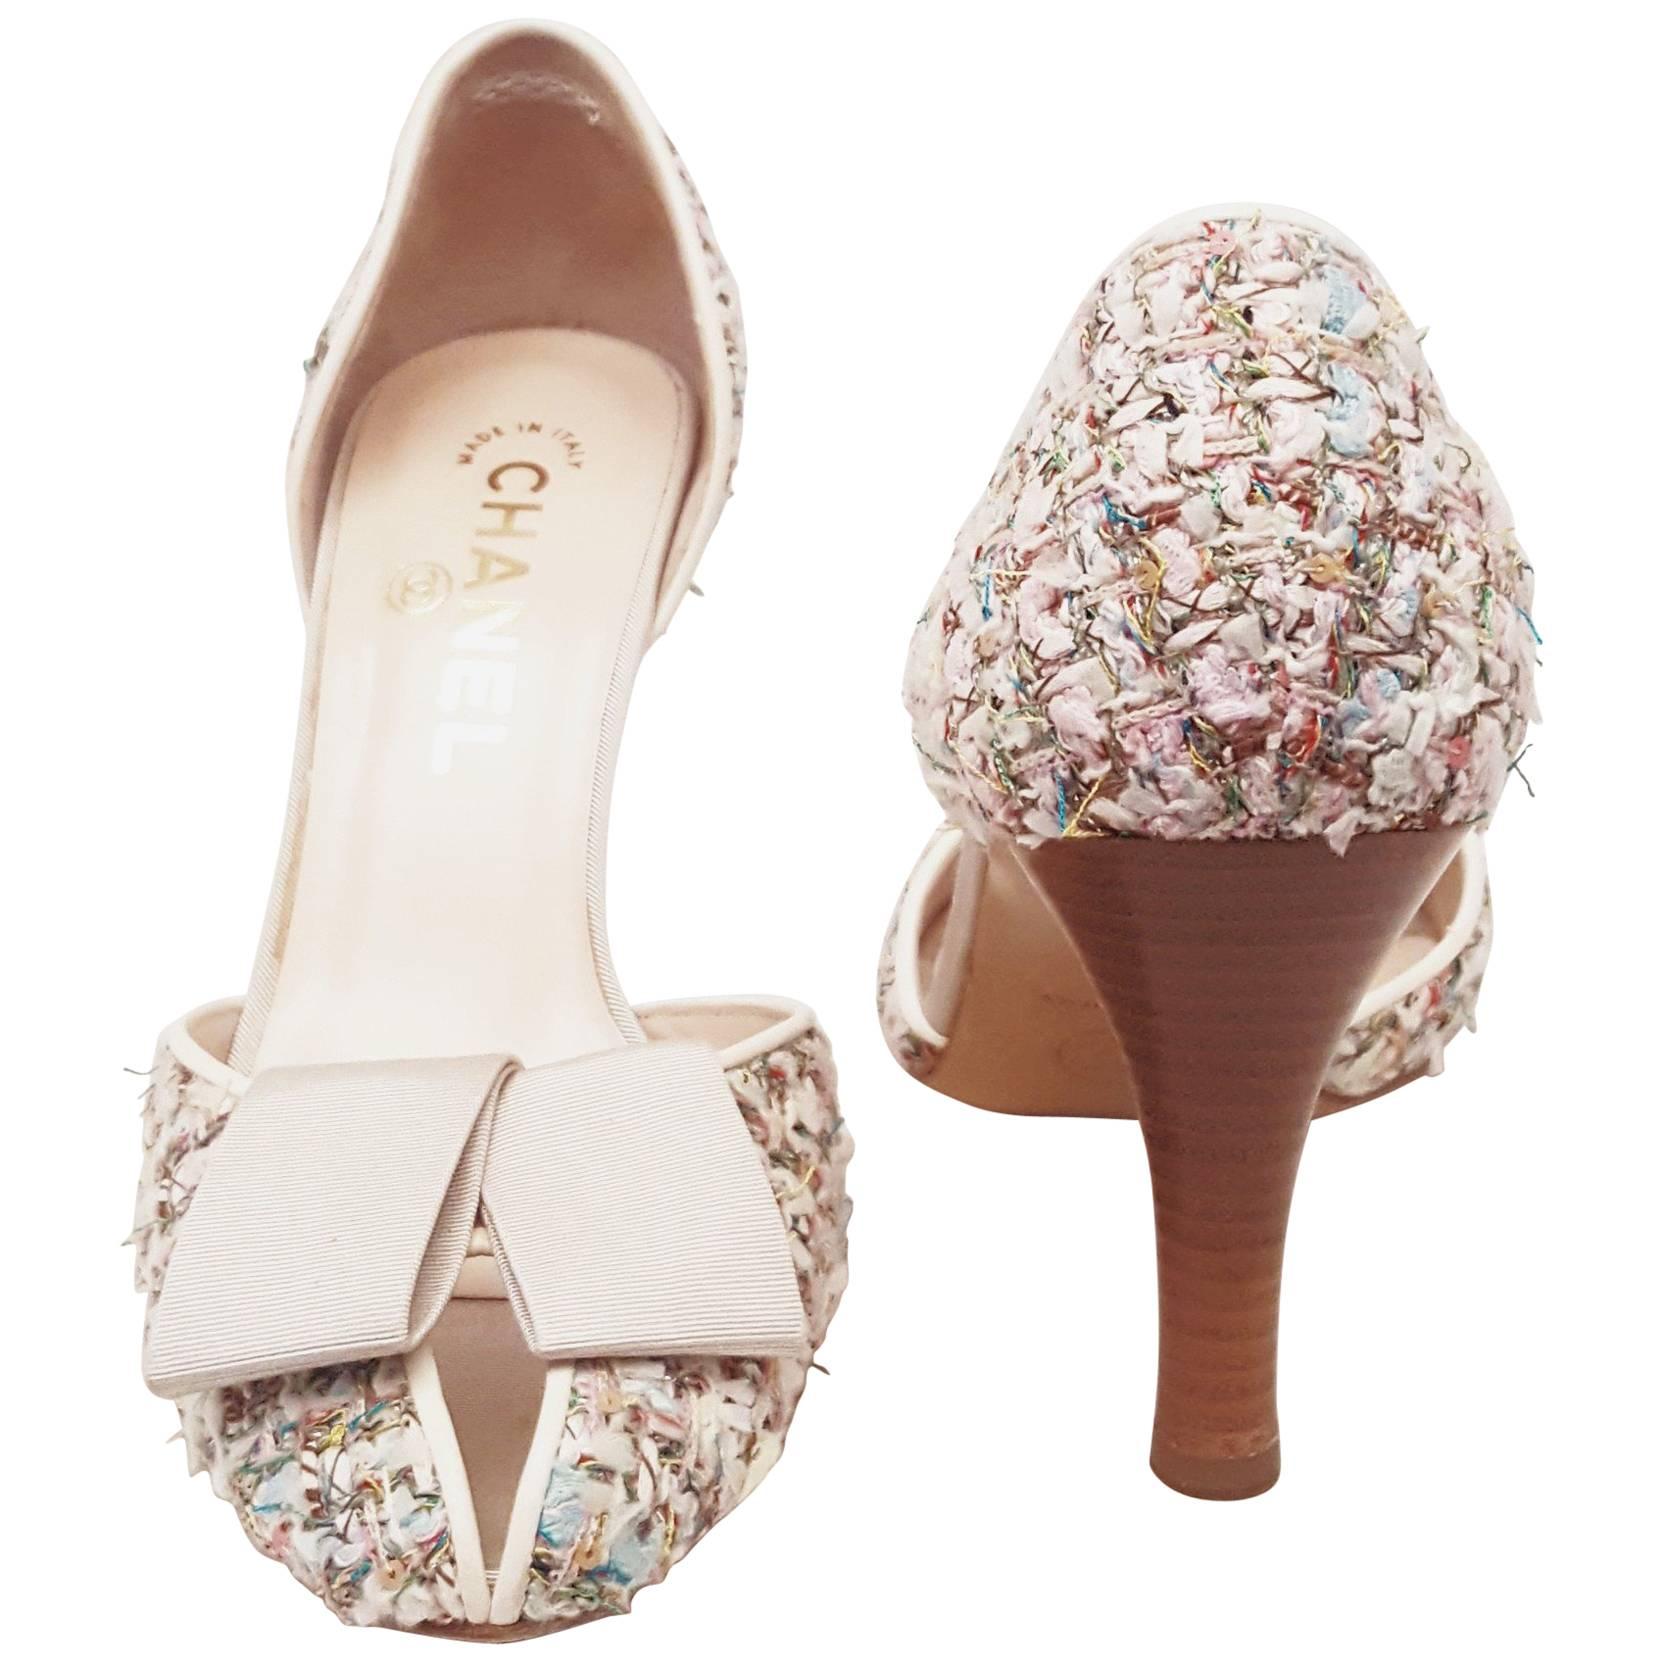 Chanel Multi Color Tweed Pumps with Wooden Round Heels